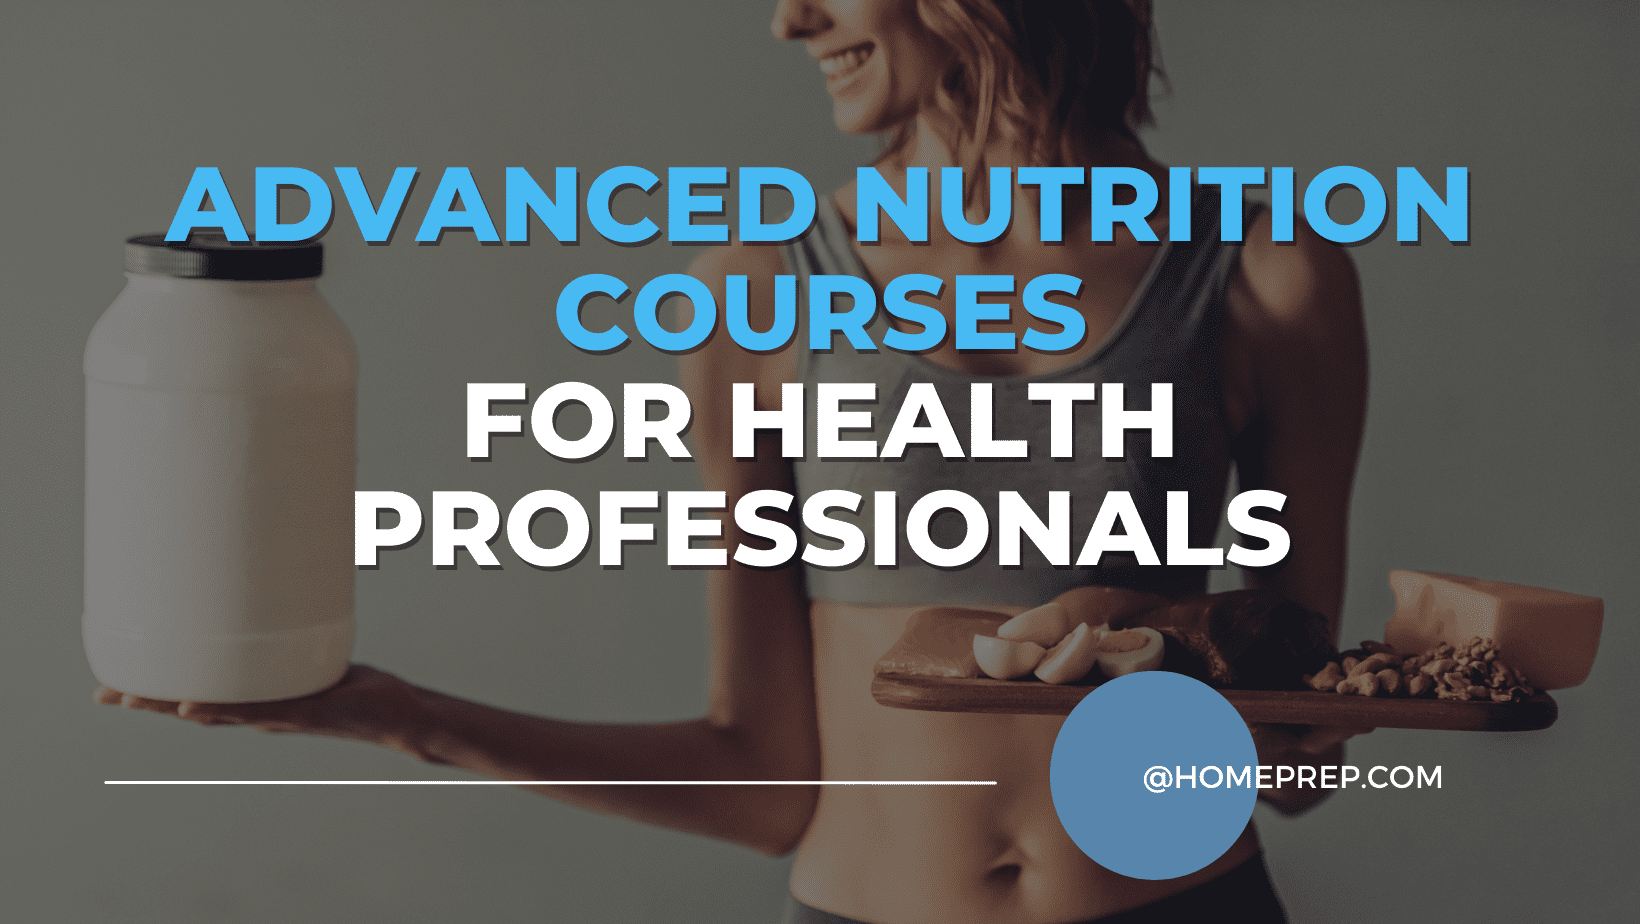 Beyond the Basics: Elevating Nutrition Knowledge for Healthcare Professionals